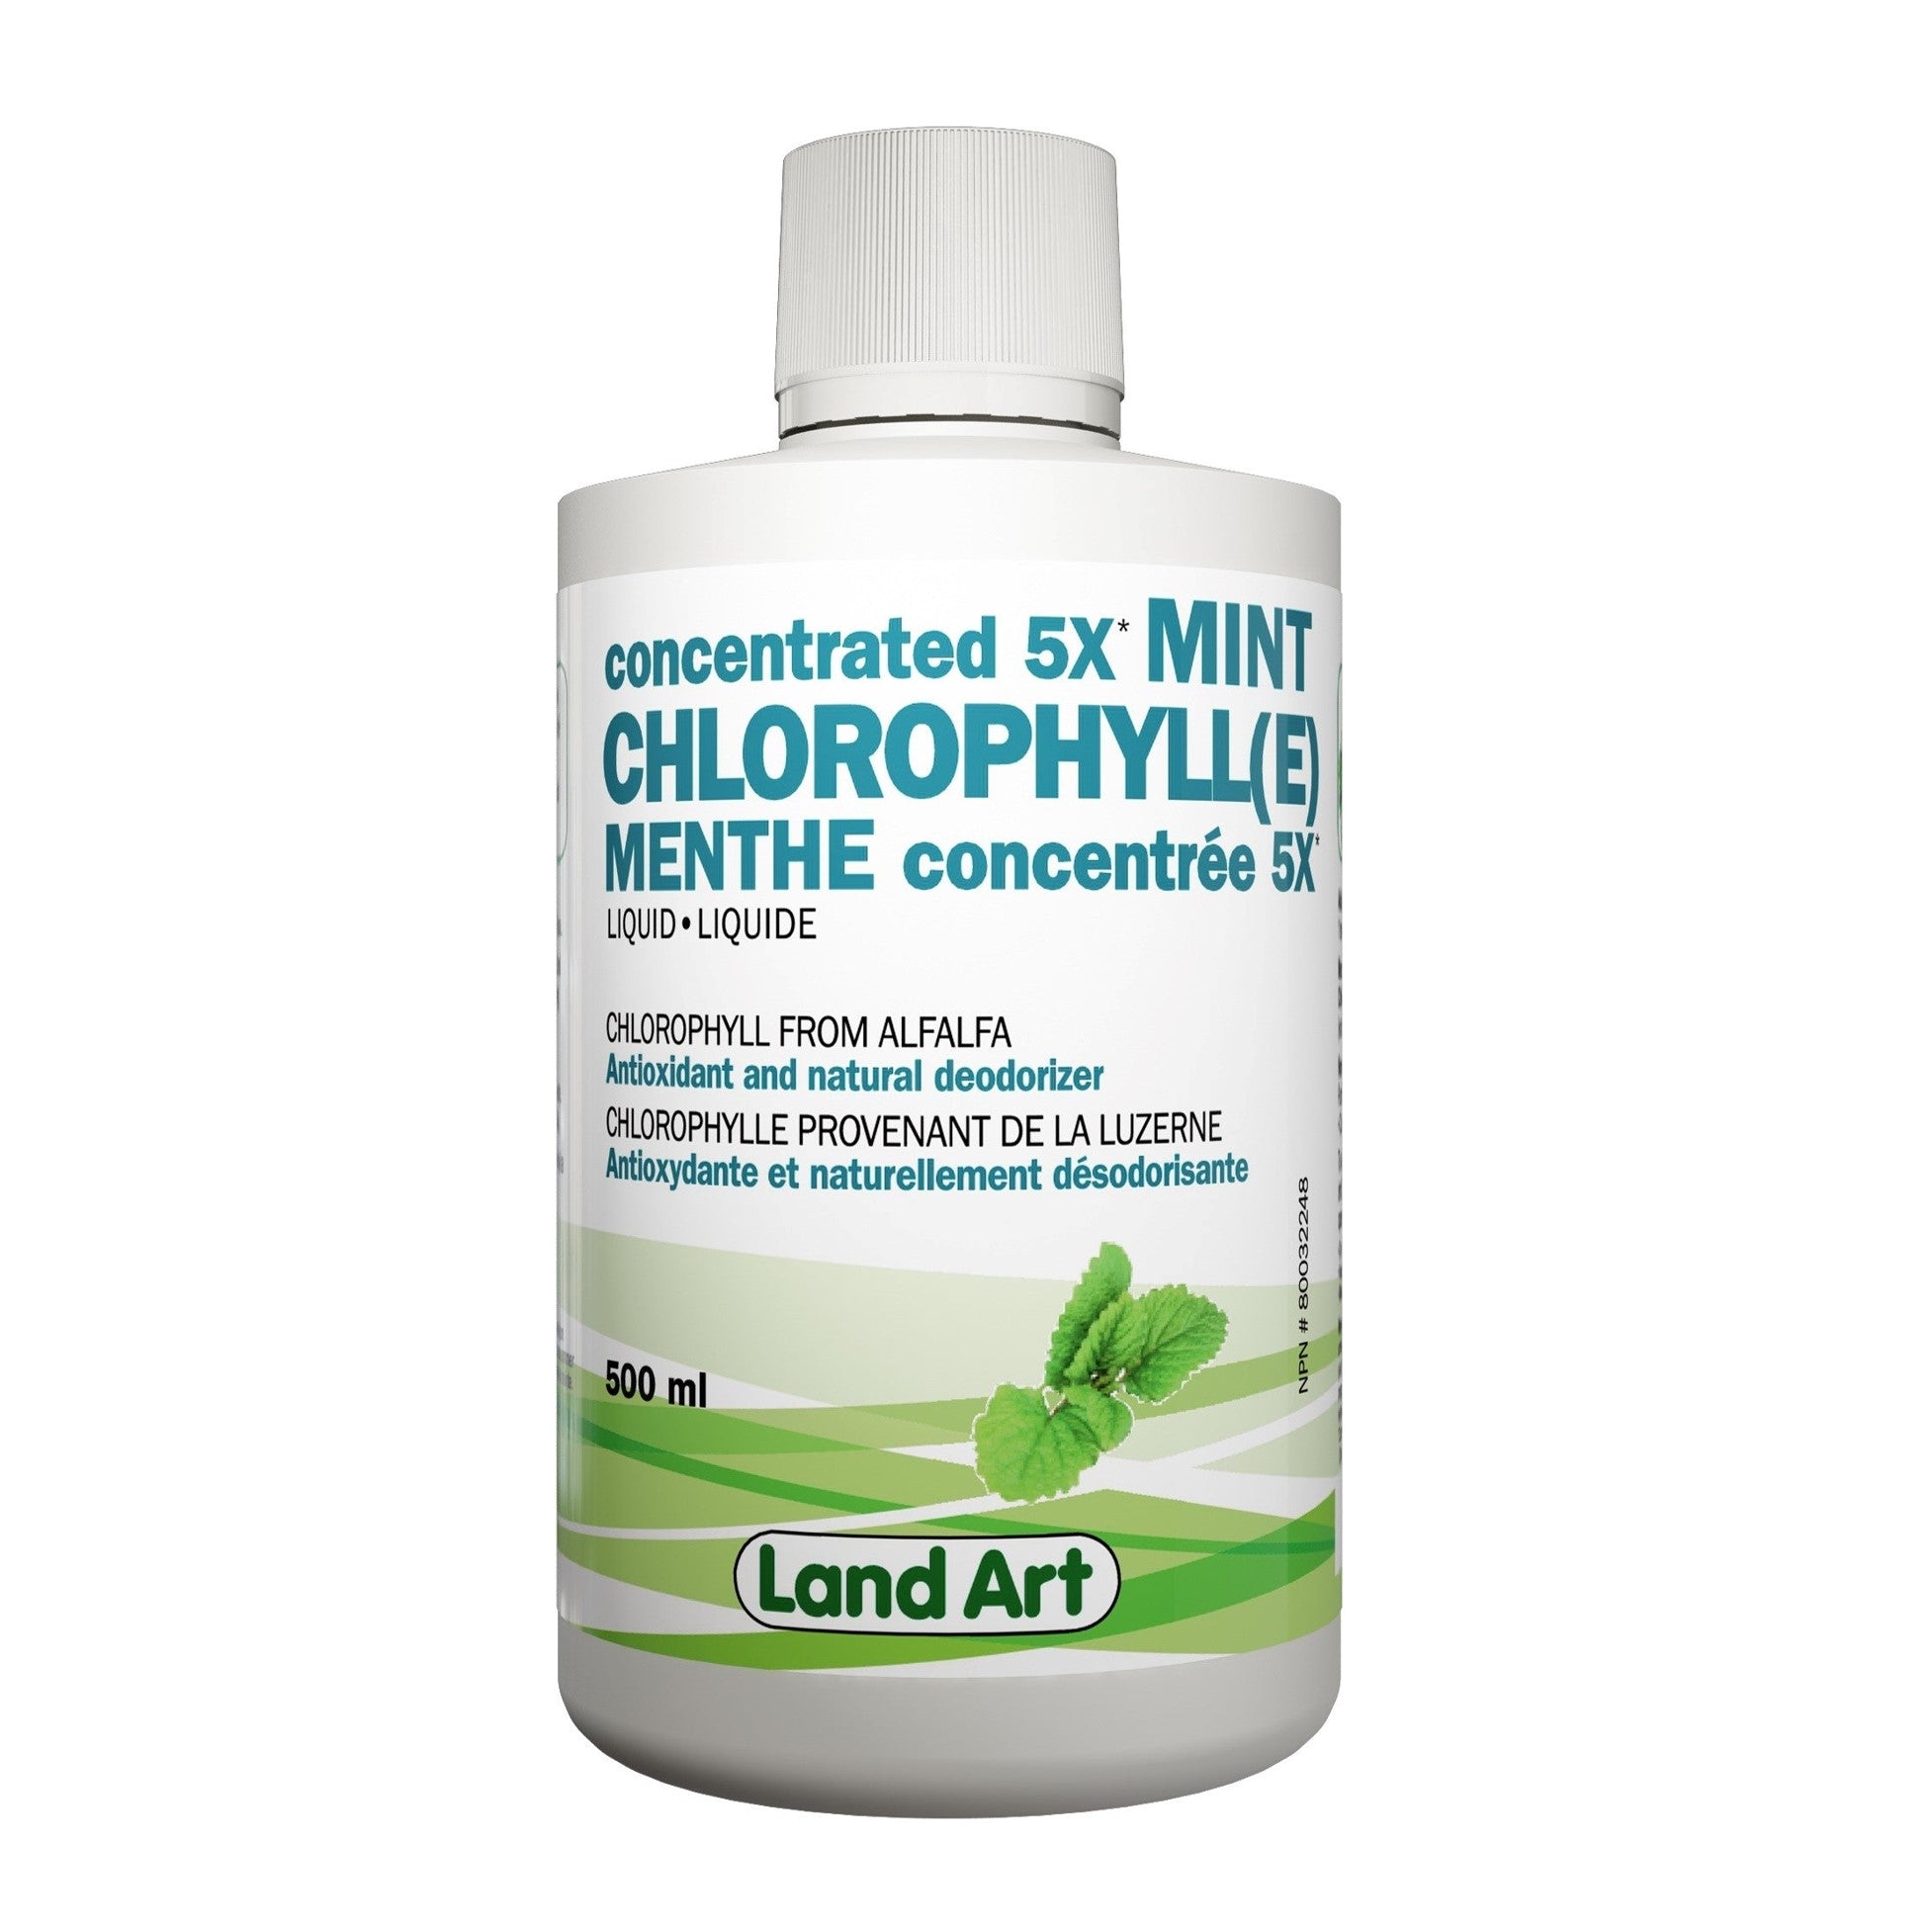 Land Art Chlorophyll(e) Concentrated 5x 500ml